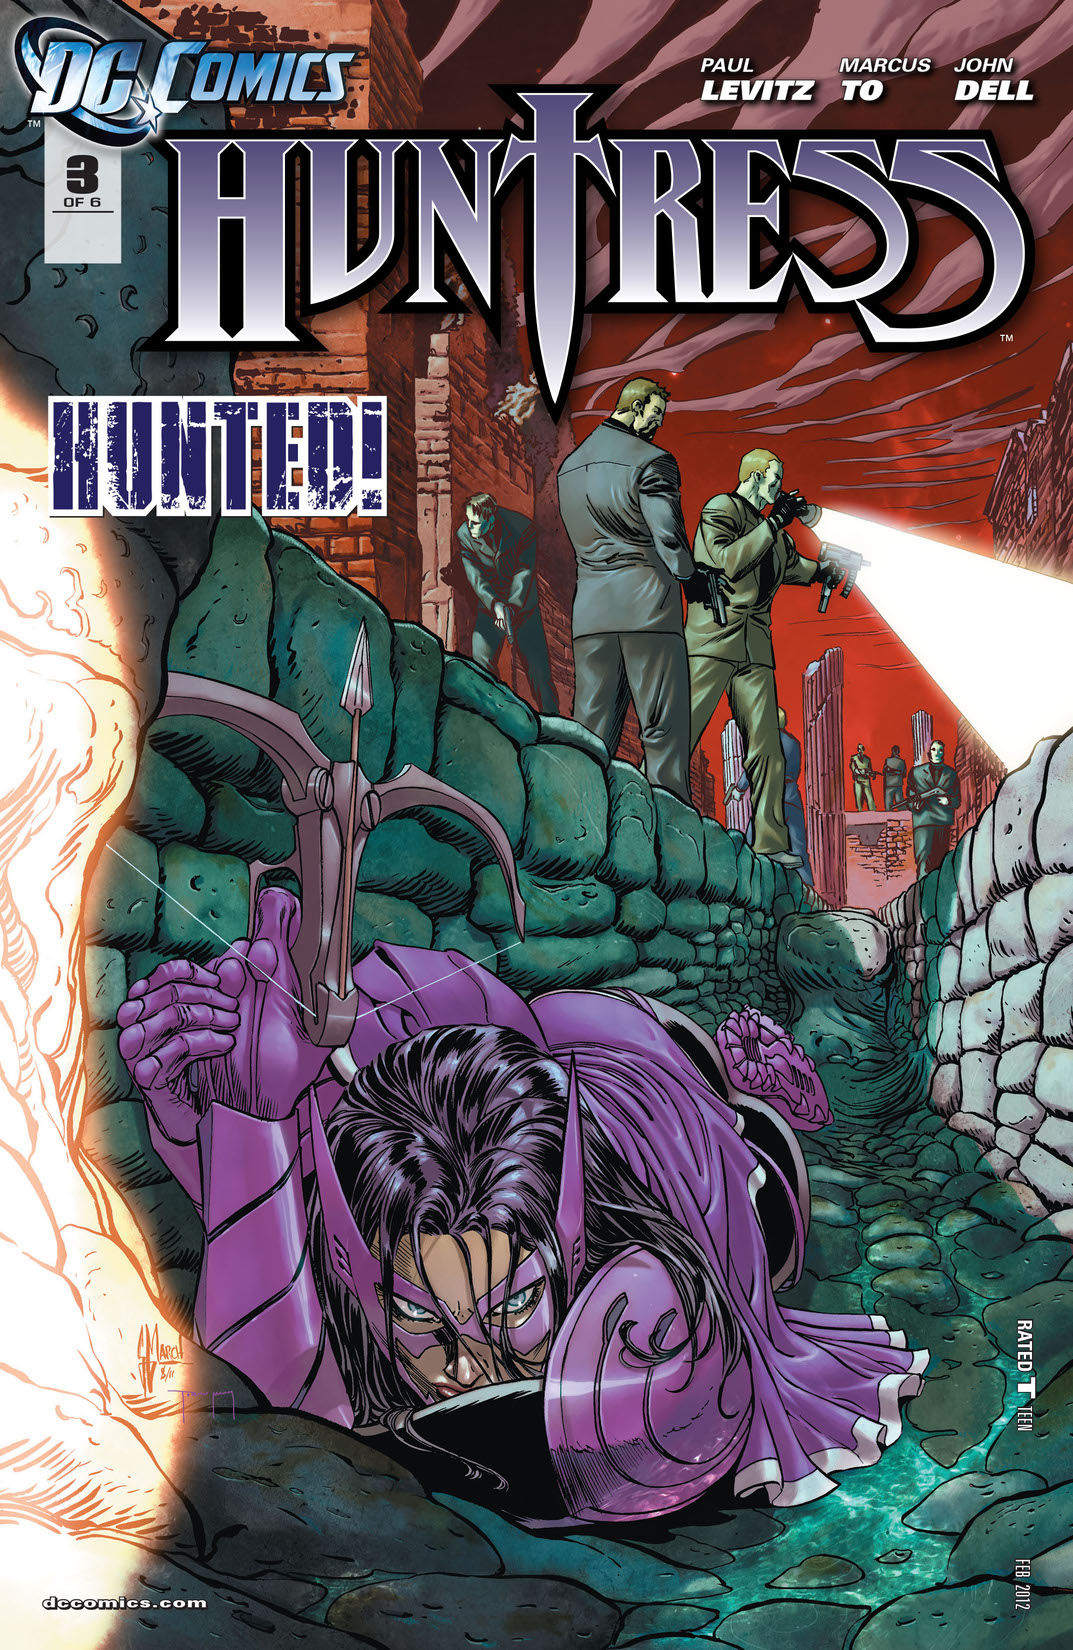 Huntress #3 preview images